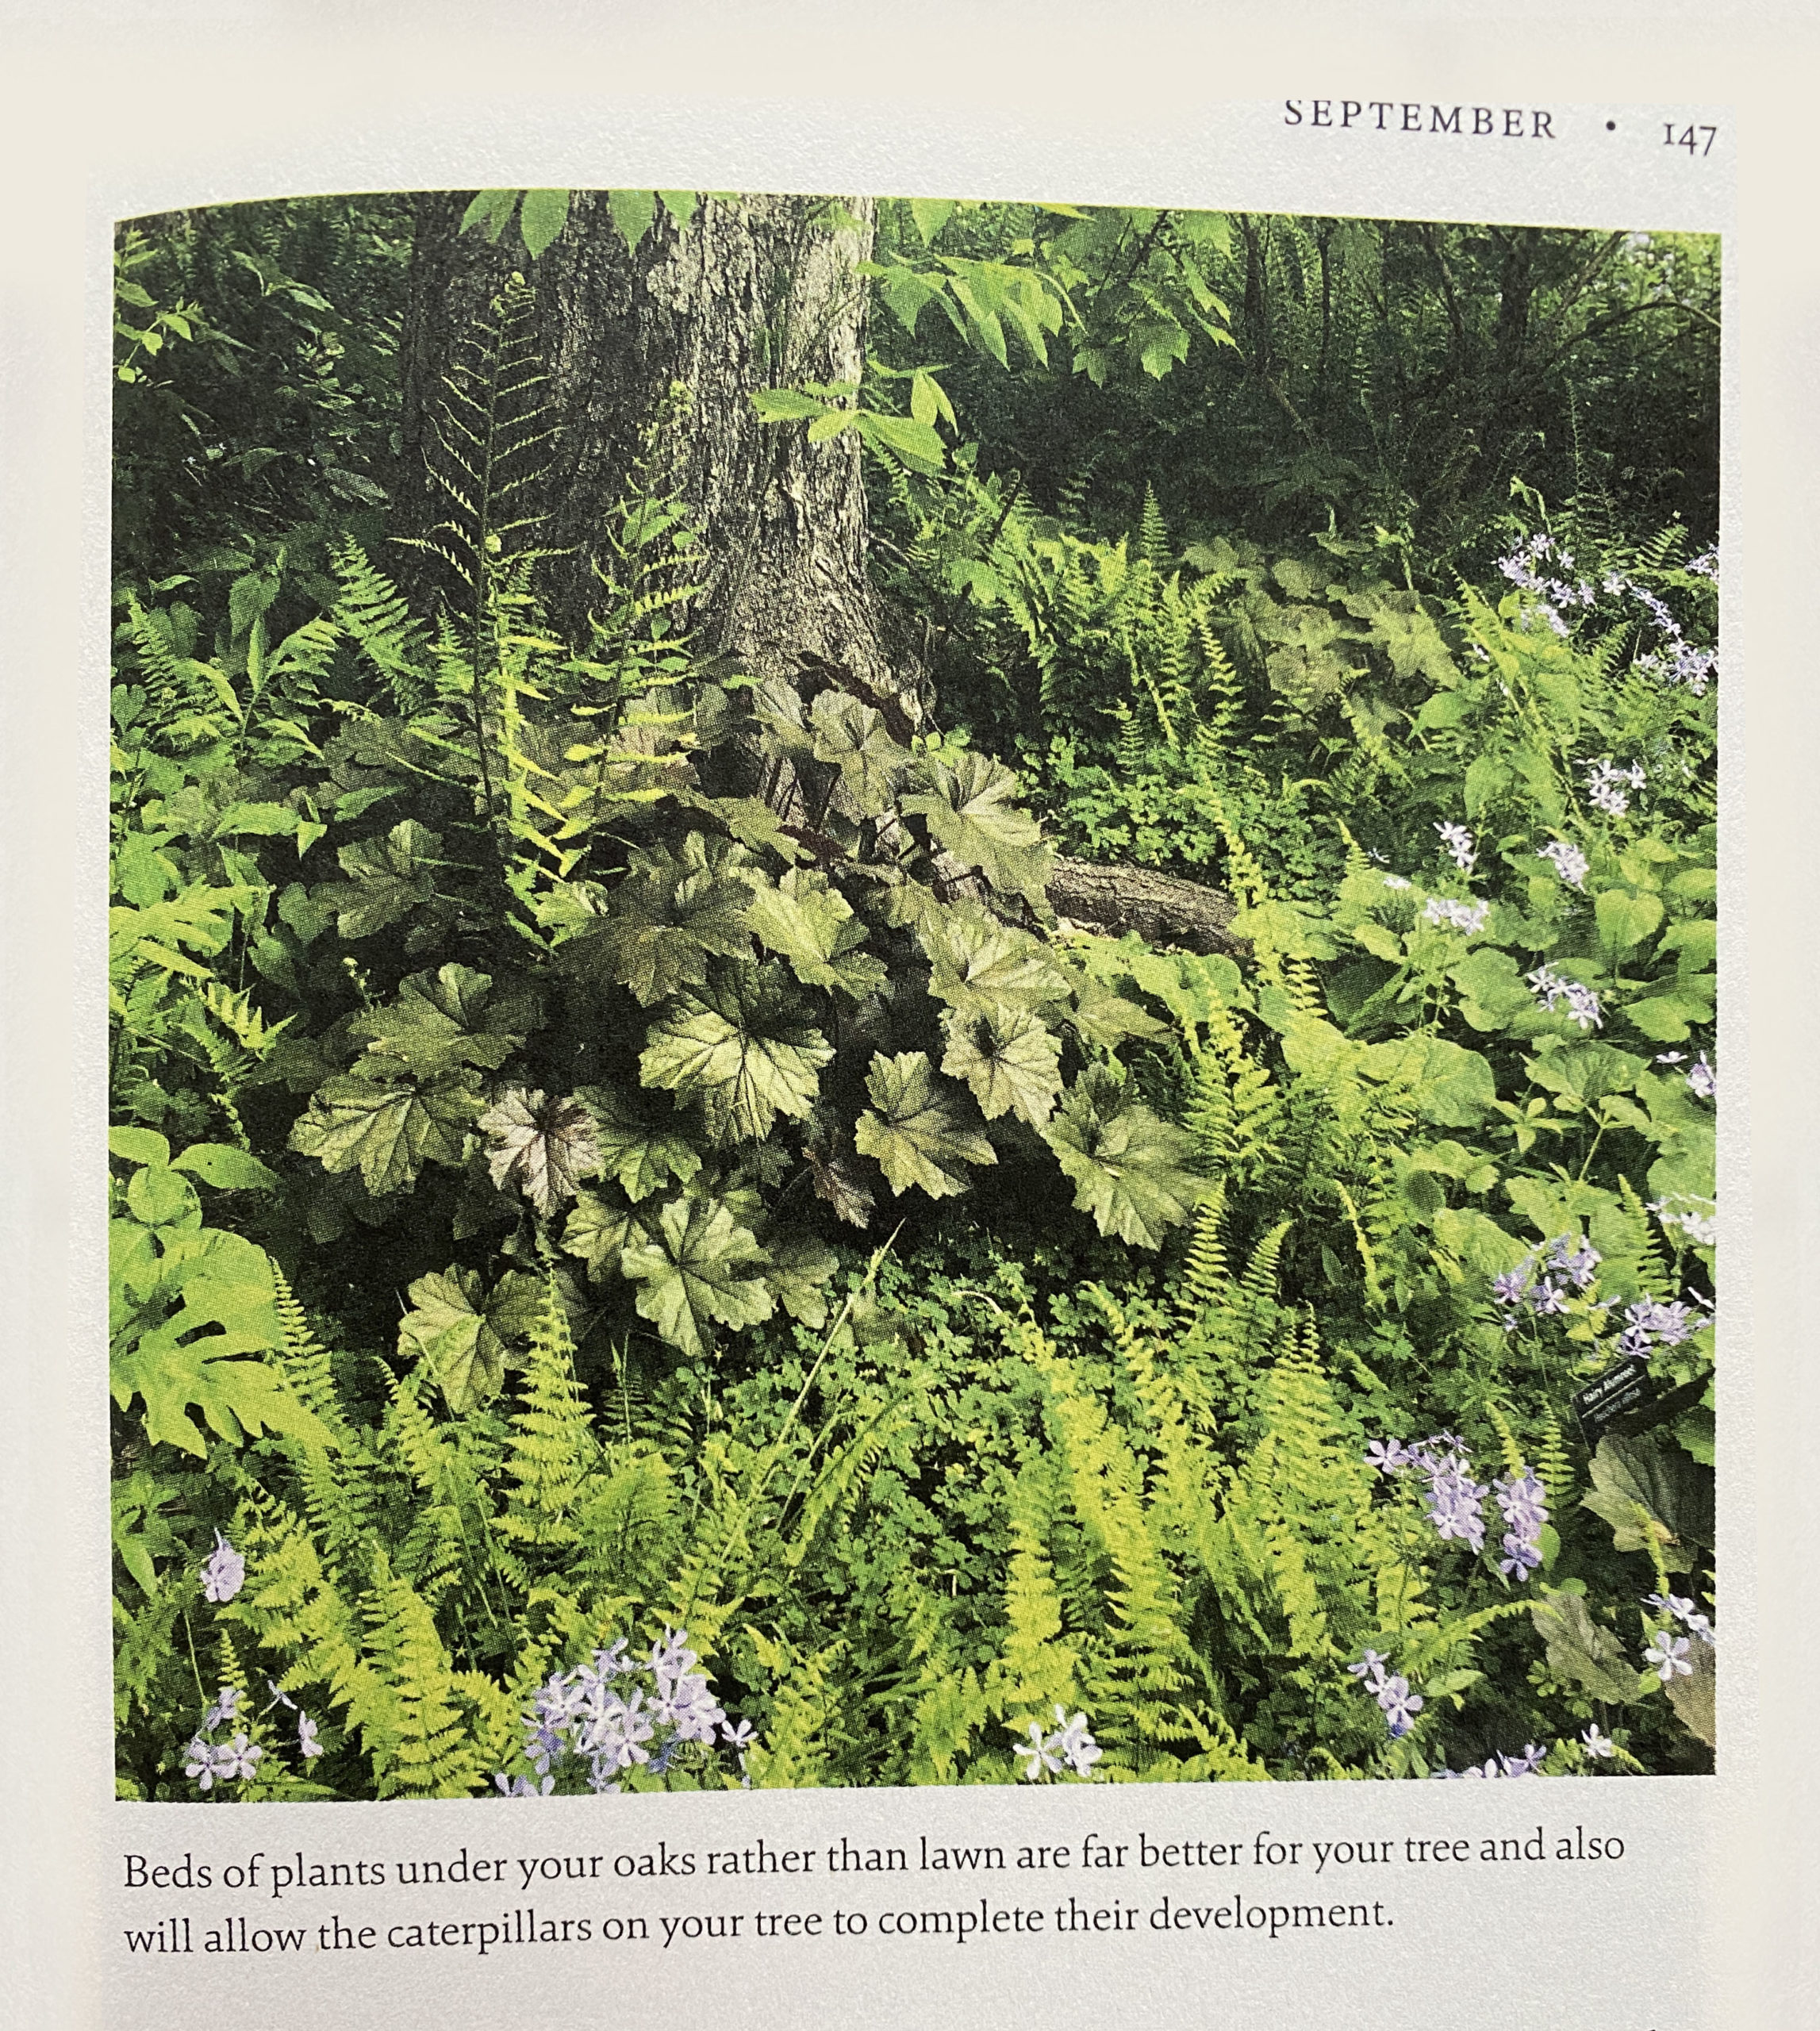 photo of a book with an image of a tree with ferns and other plants below